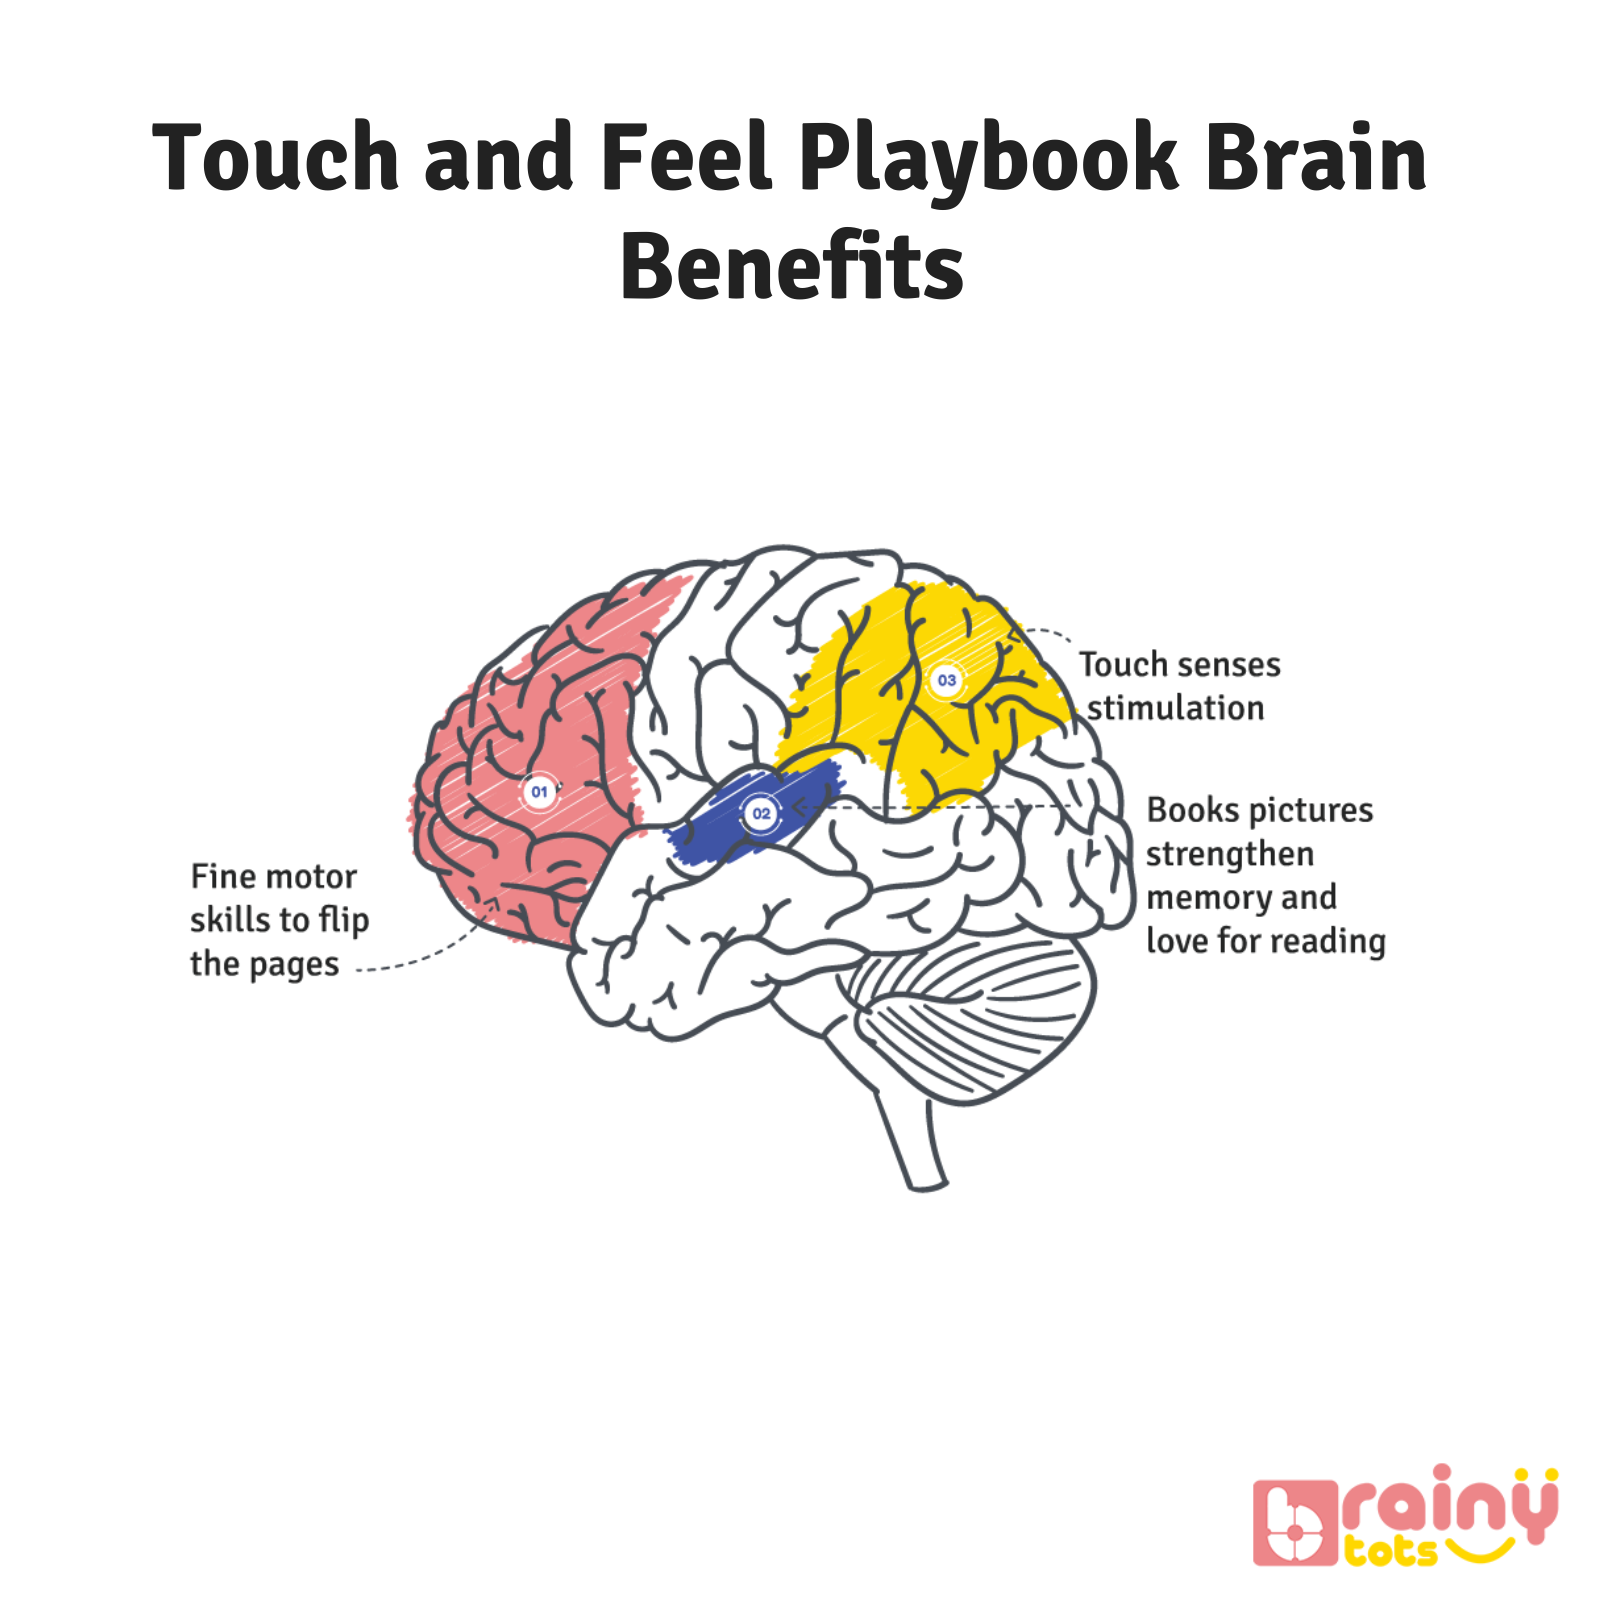 The Touch and Feel Playbook enhances brain development in newborn babies by stimulating tactile exploration and early cognitive skills. These Montessori-inspired books, designed for infants aged 0-12 months, feature varied textures that promote sensory engagement and curiosity. Safe, durable, and perfect for fostering early learning and interaction.